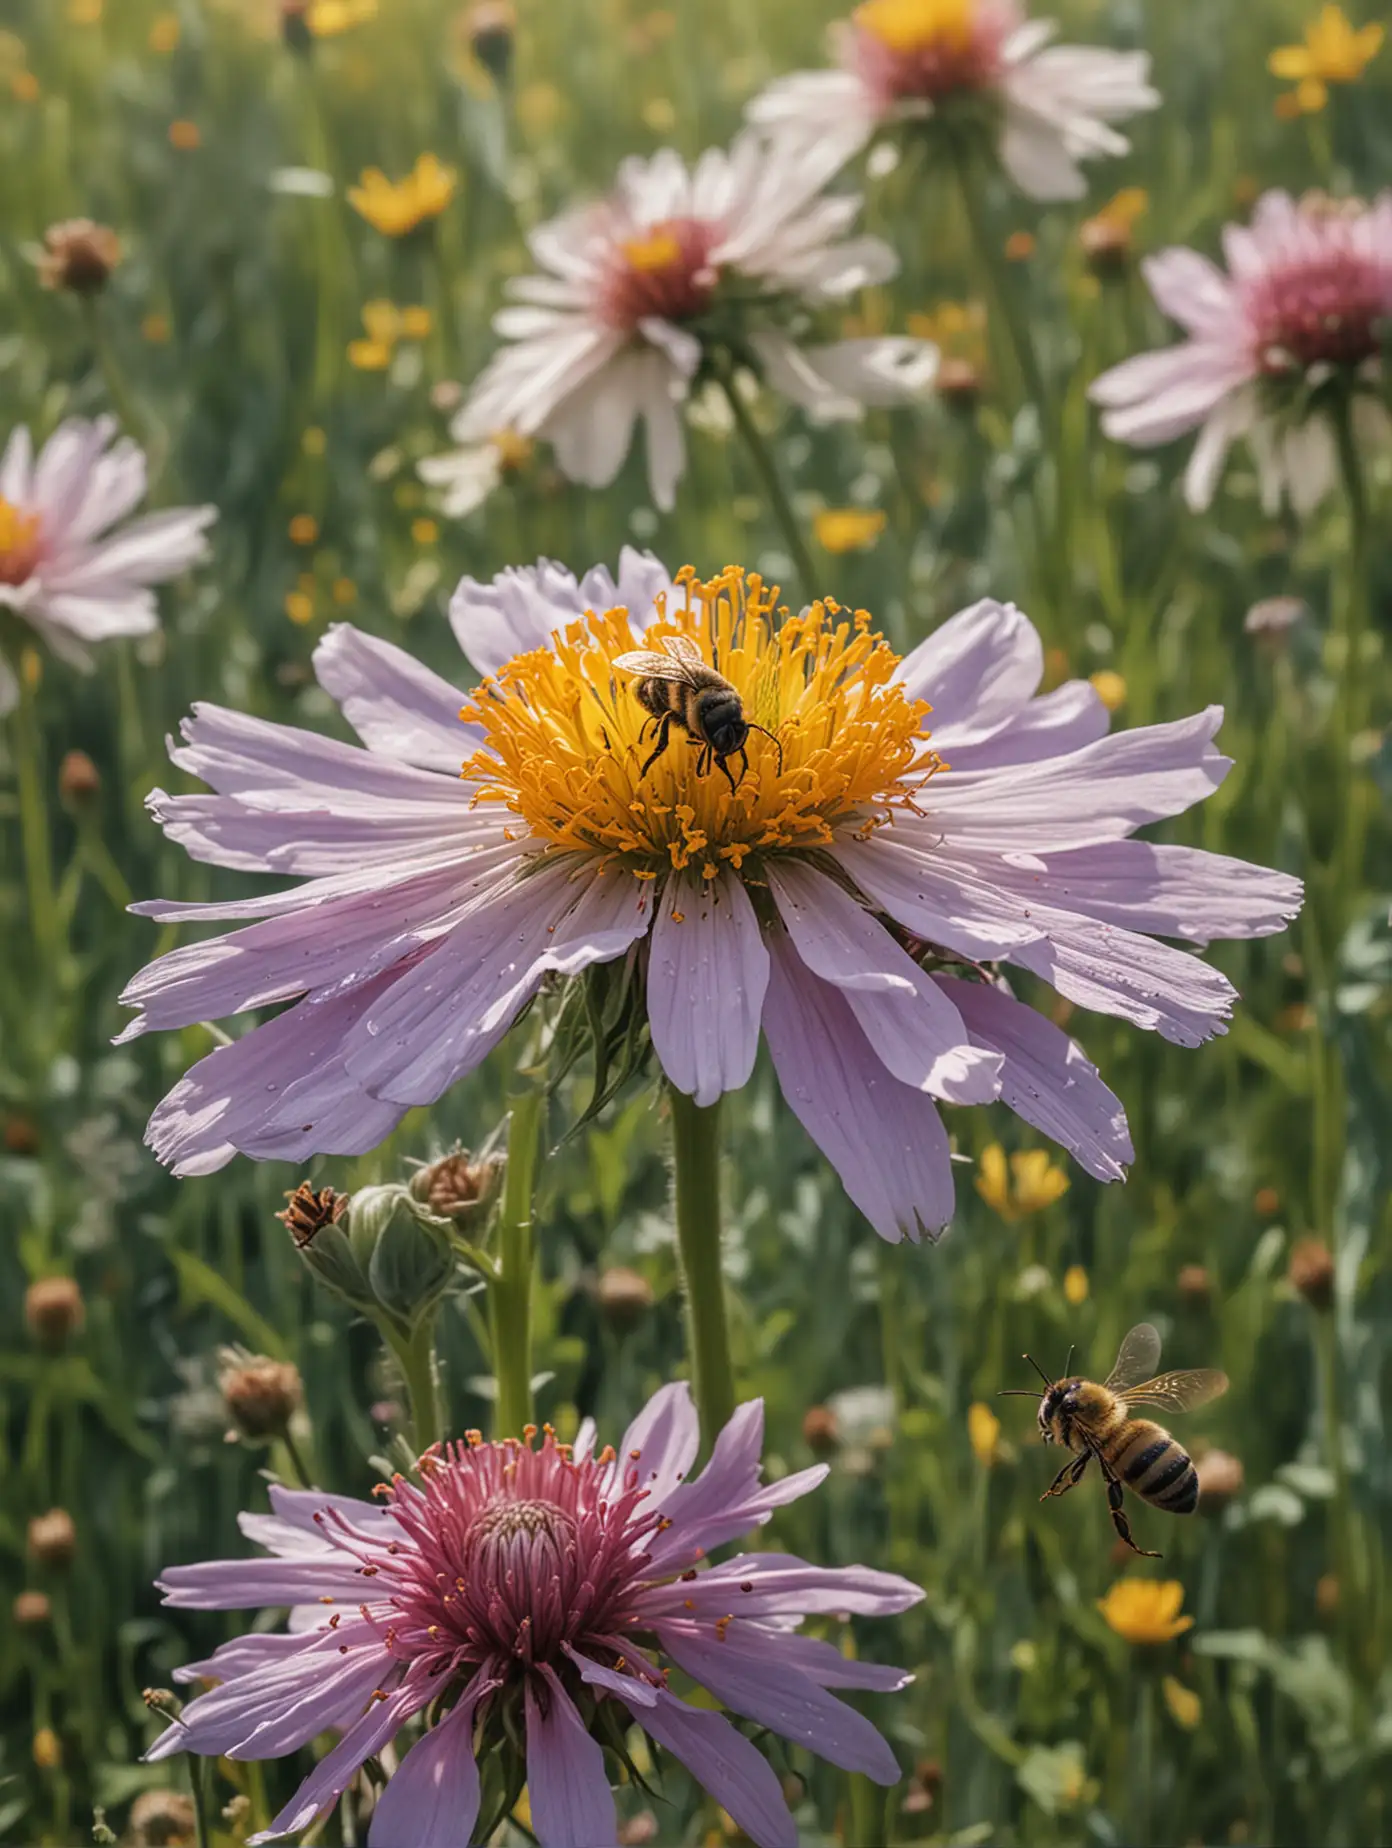 A hyper-realistic photograph depicting a single bee on a flower within a field of wildflowers.